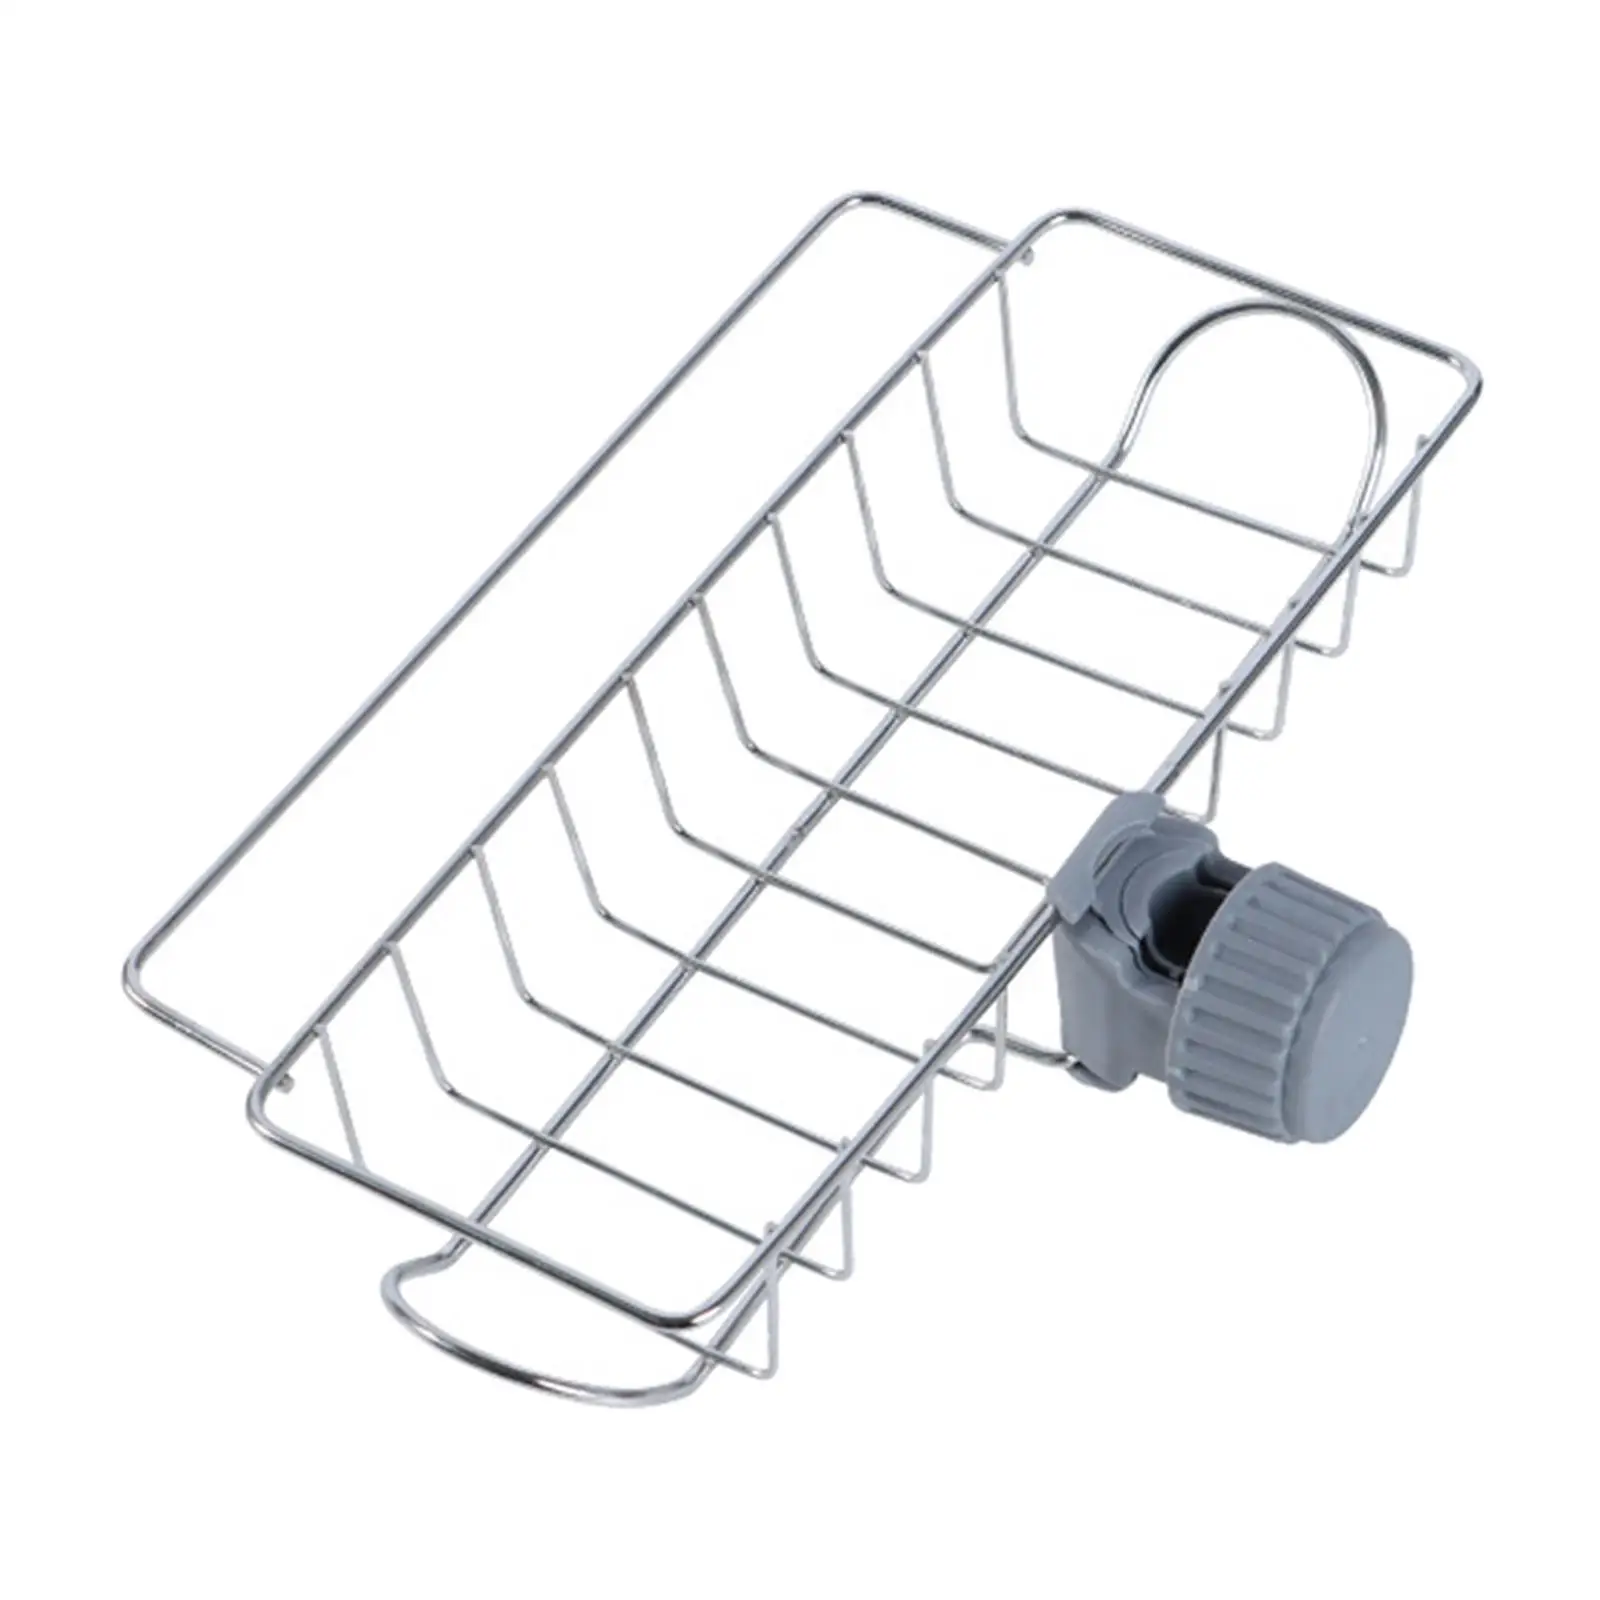 Awning Pole Mounted Storage Rack Metal Wire Basket Stainless Steel Canopy Pole Mounted Storage Basket for Beach Fishing BBQ